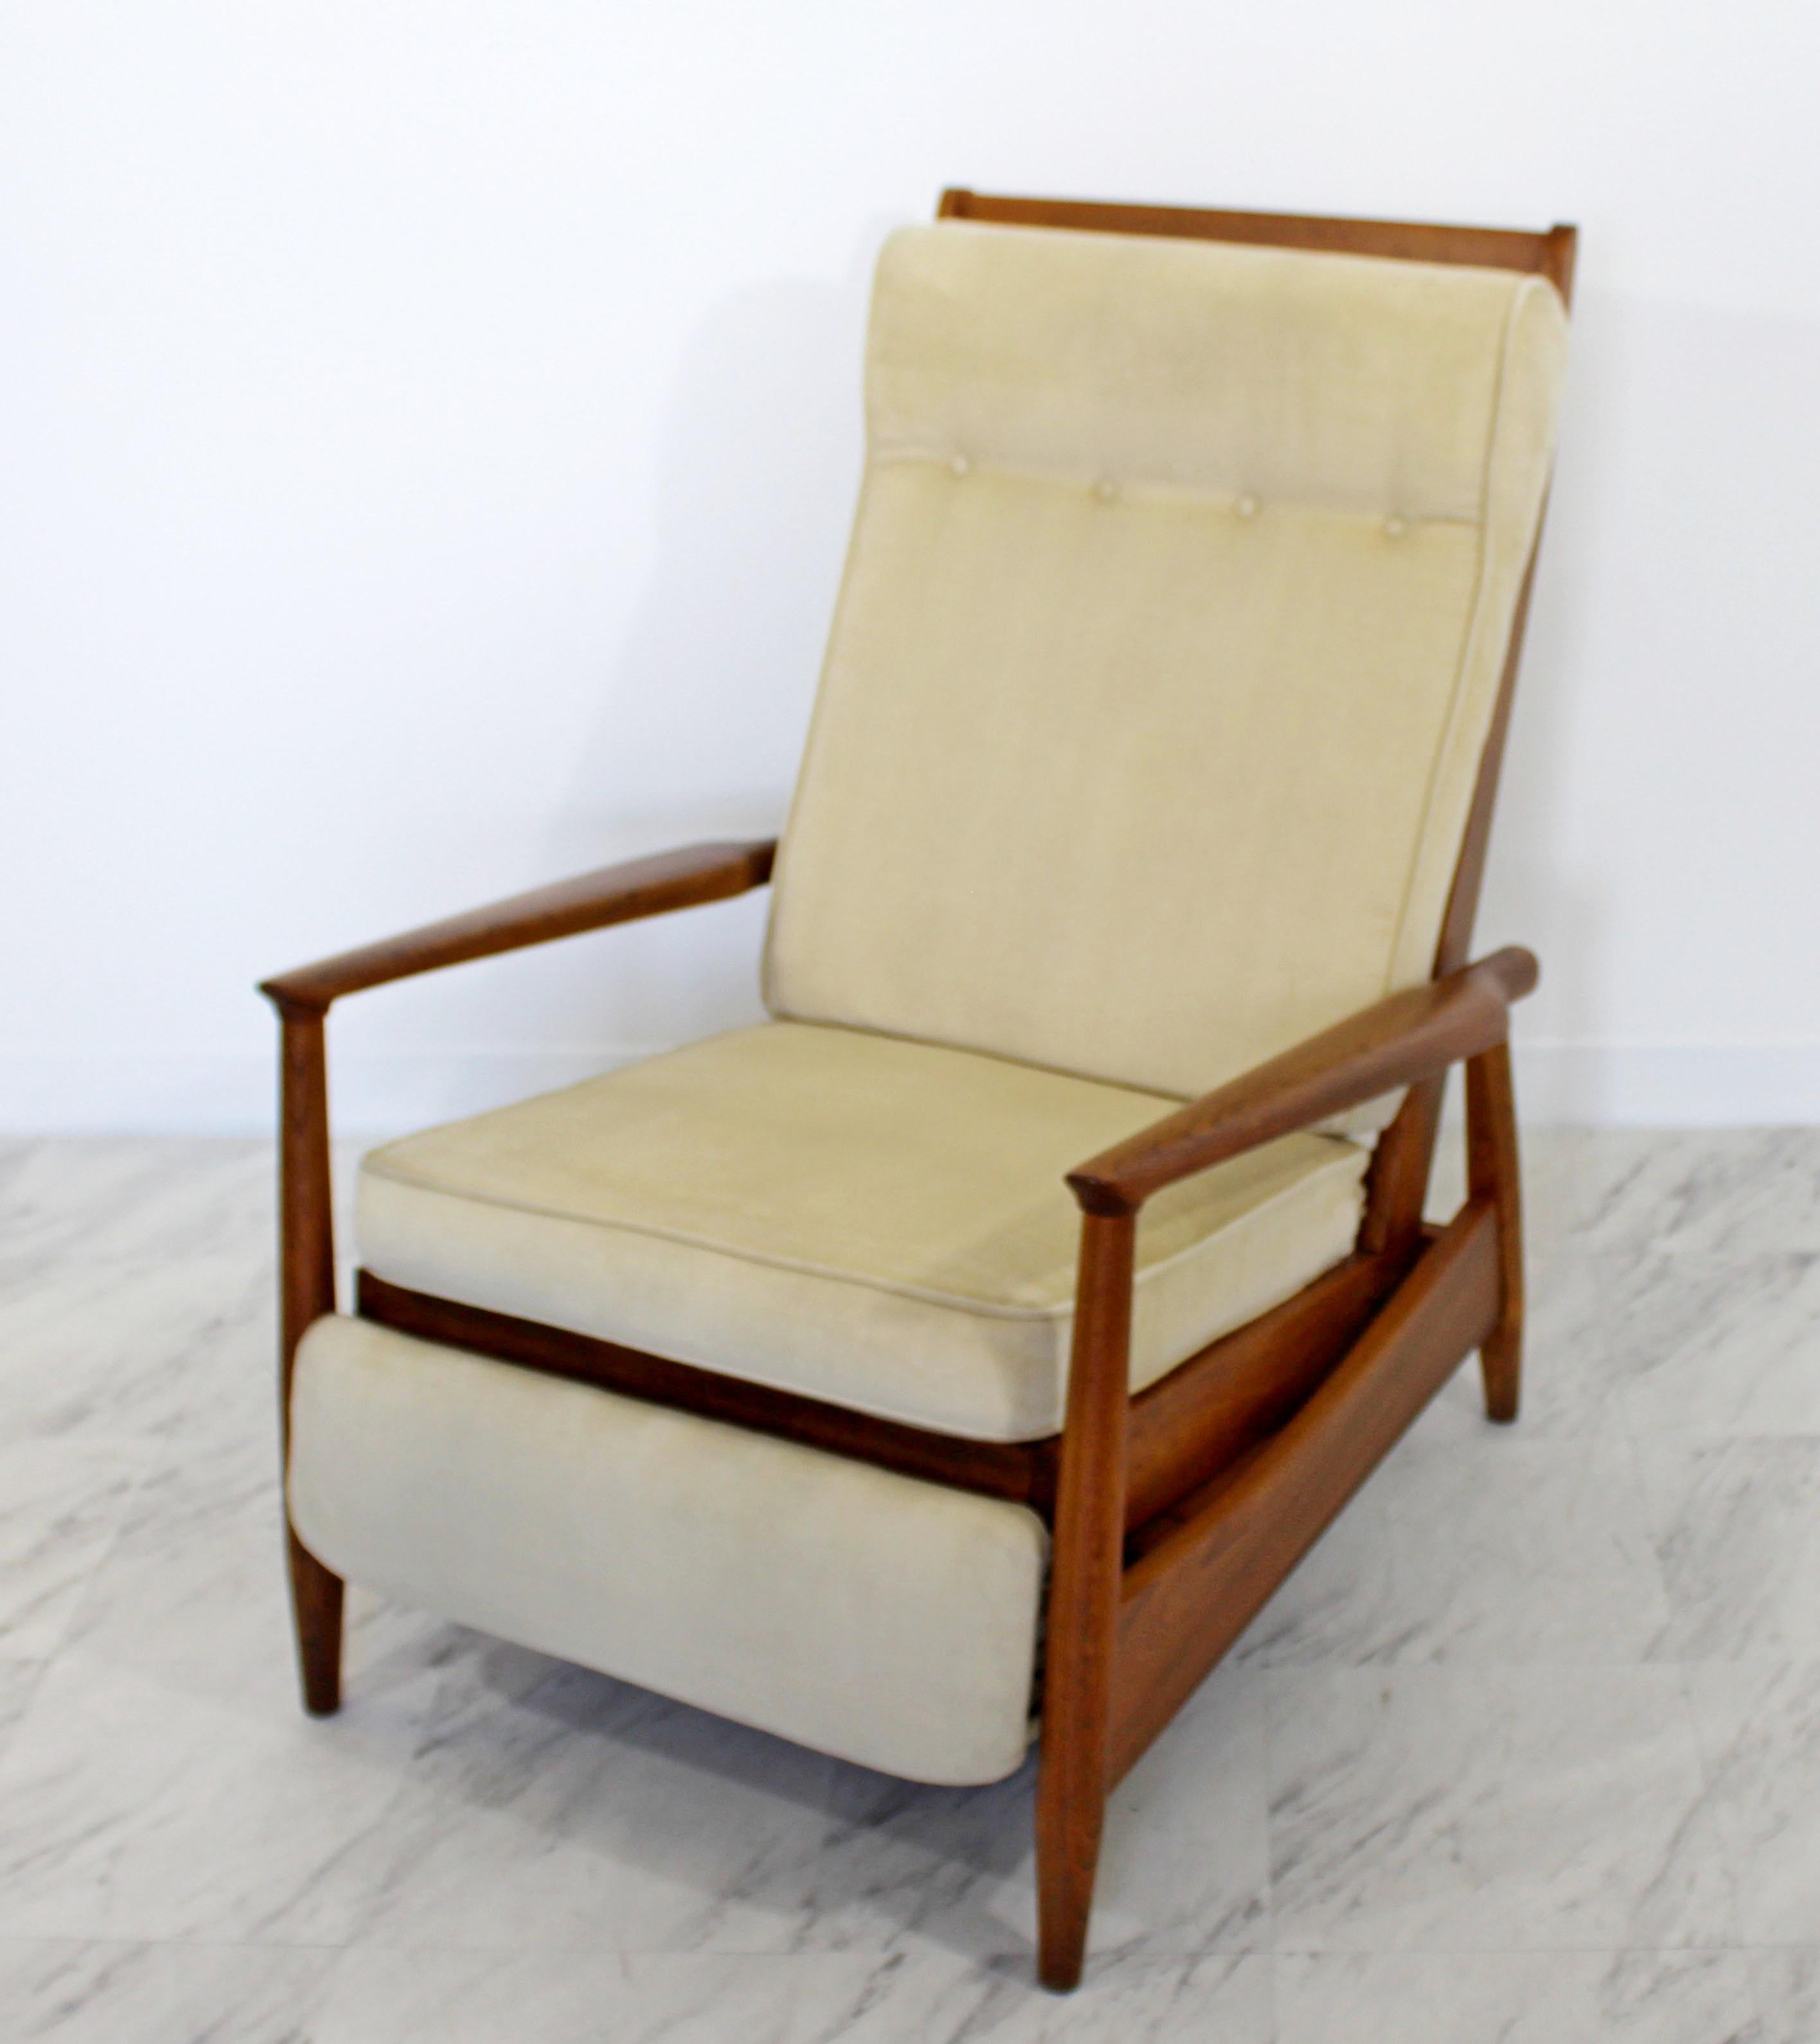 For your consideration is a wonderful, wooden recliner Folke Ohlsson Dux reclining lounge chair, circa the 1960s. In good vintage condition. The dimensions are 29